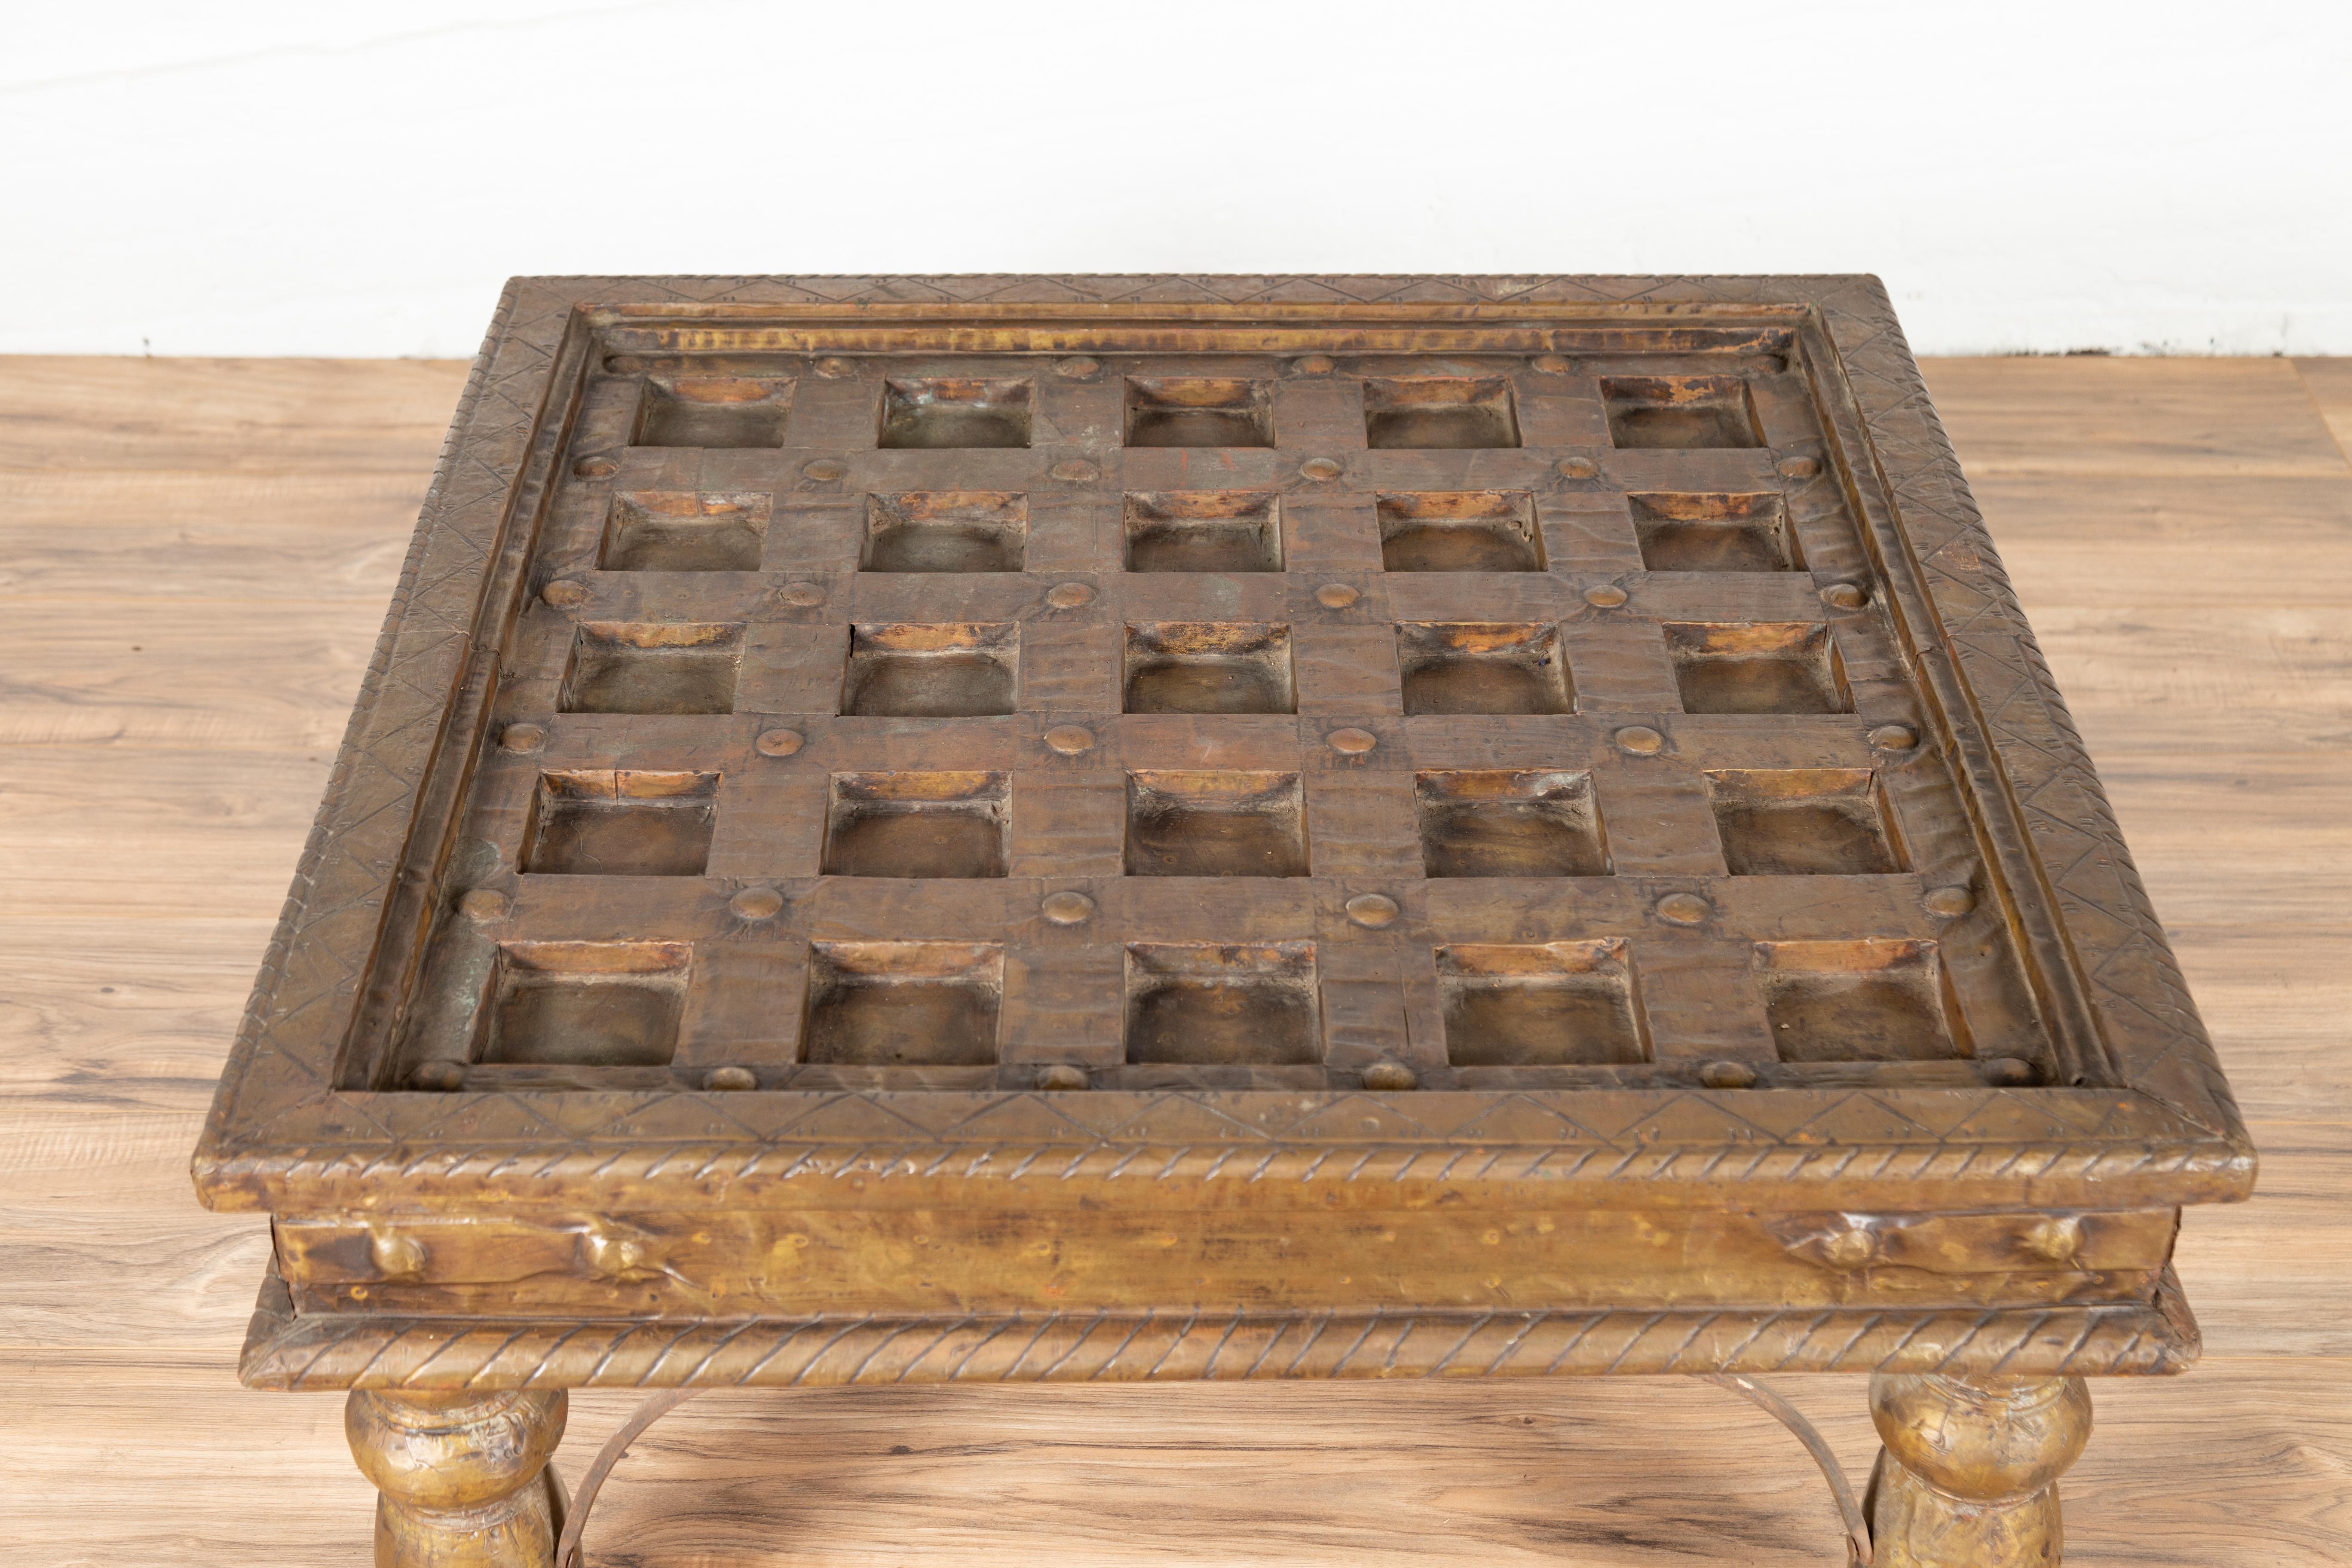 Indian Geometric Top Wood and Brass Window Grate Made into a Coffee Table 5